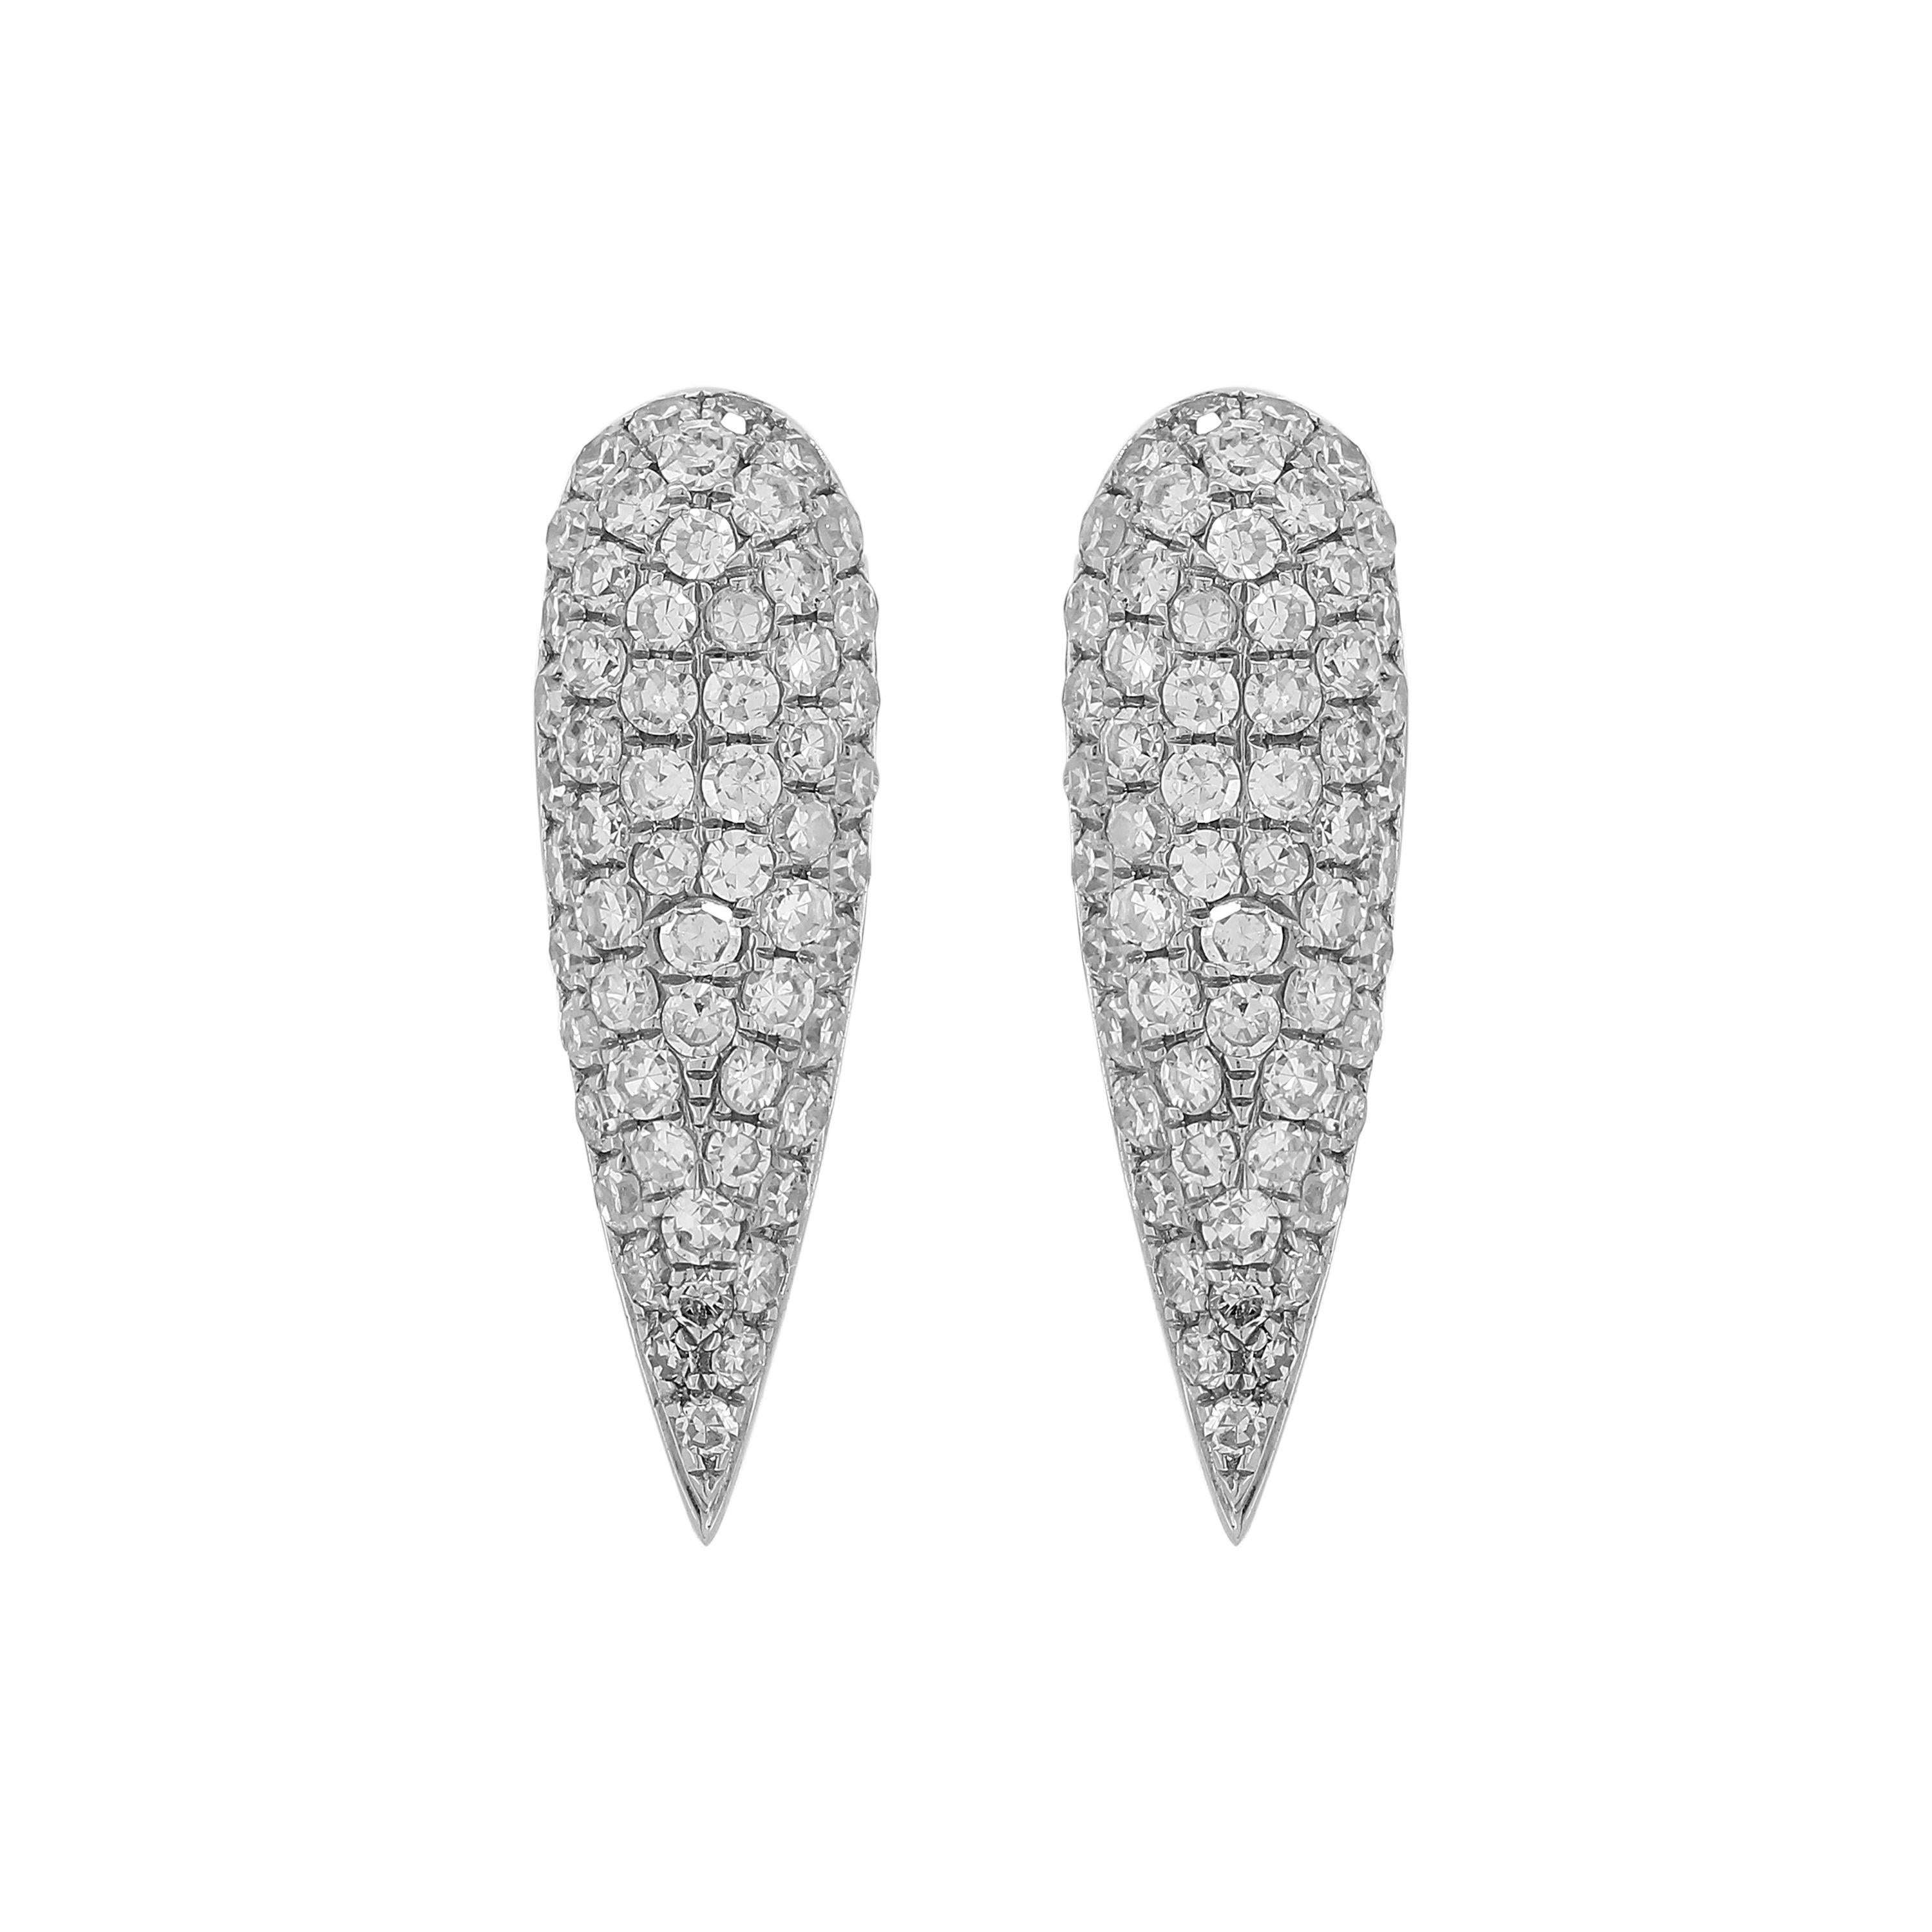 One of a kind pear shaped studs featured with 118 pave diamonds by Luxle. Crafted in 14K white gold these come with clutch backs.

Please follow the Luxury Jewels storefront to view the latest collections & exclusive one of a kind pieces. Luxury